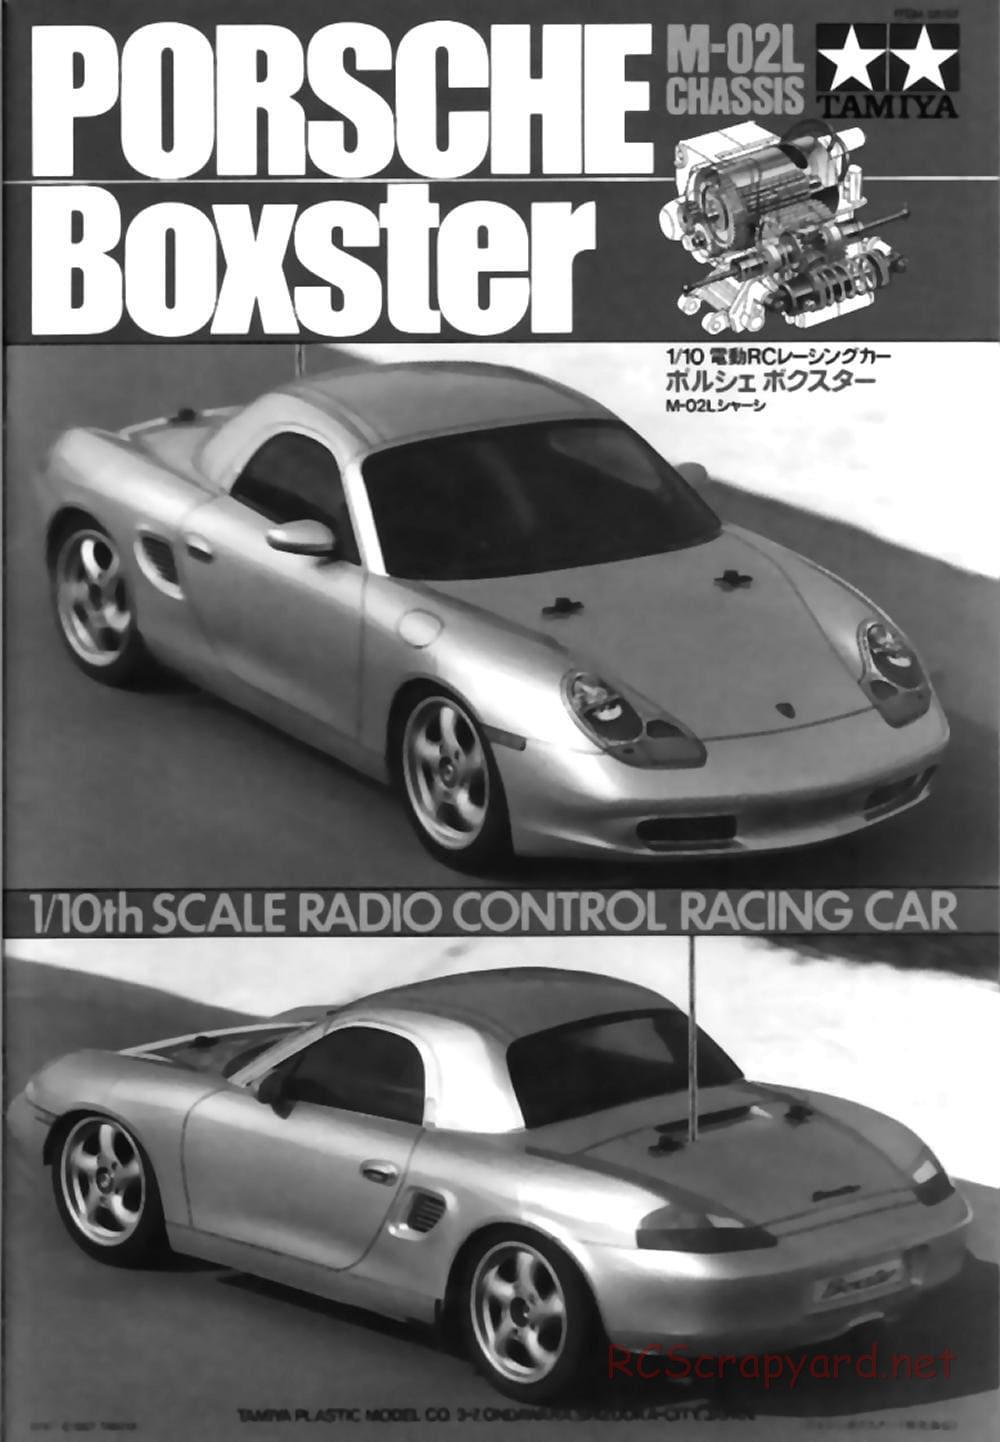 Tamiya - Porsche Boxster - M02L Chassis - Manual - Page 1